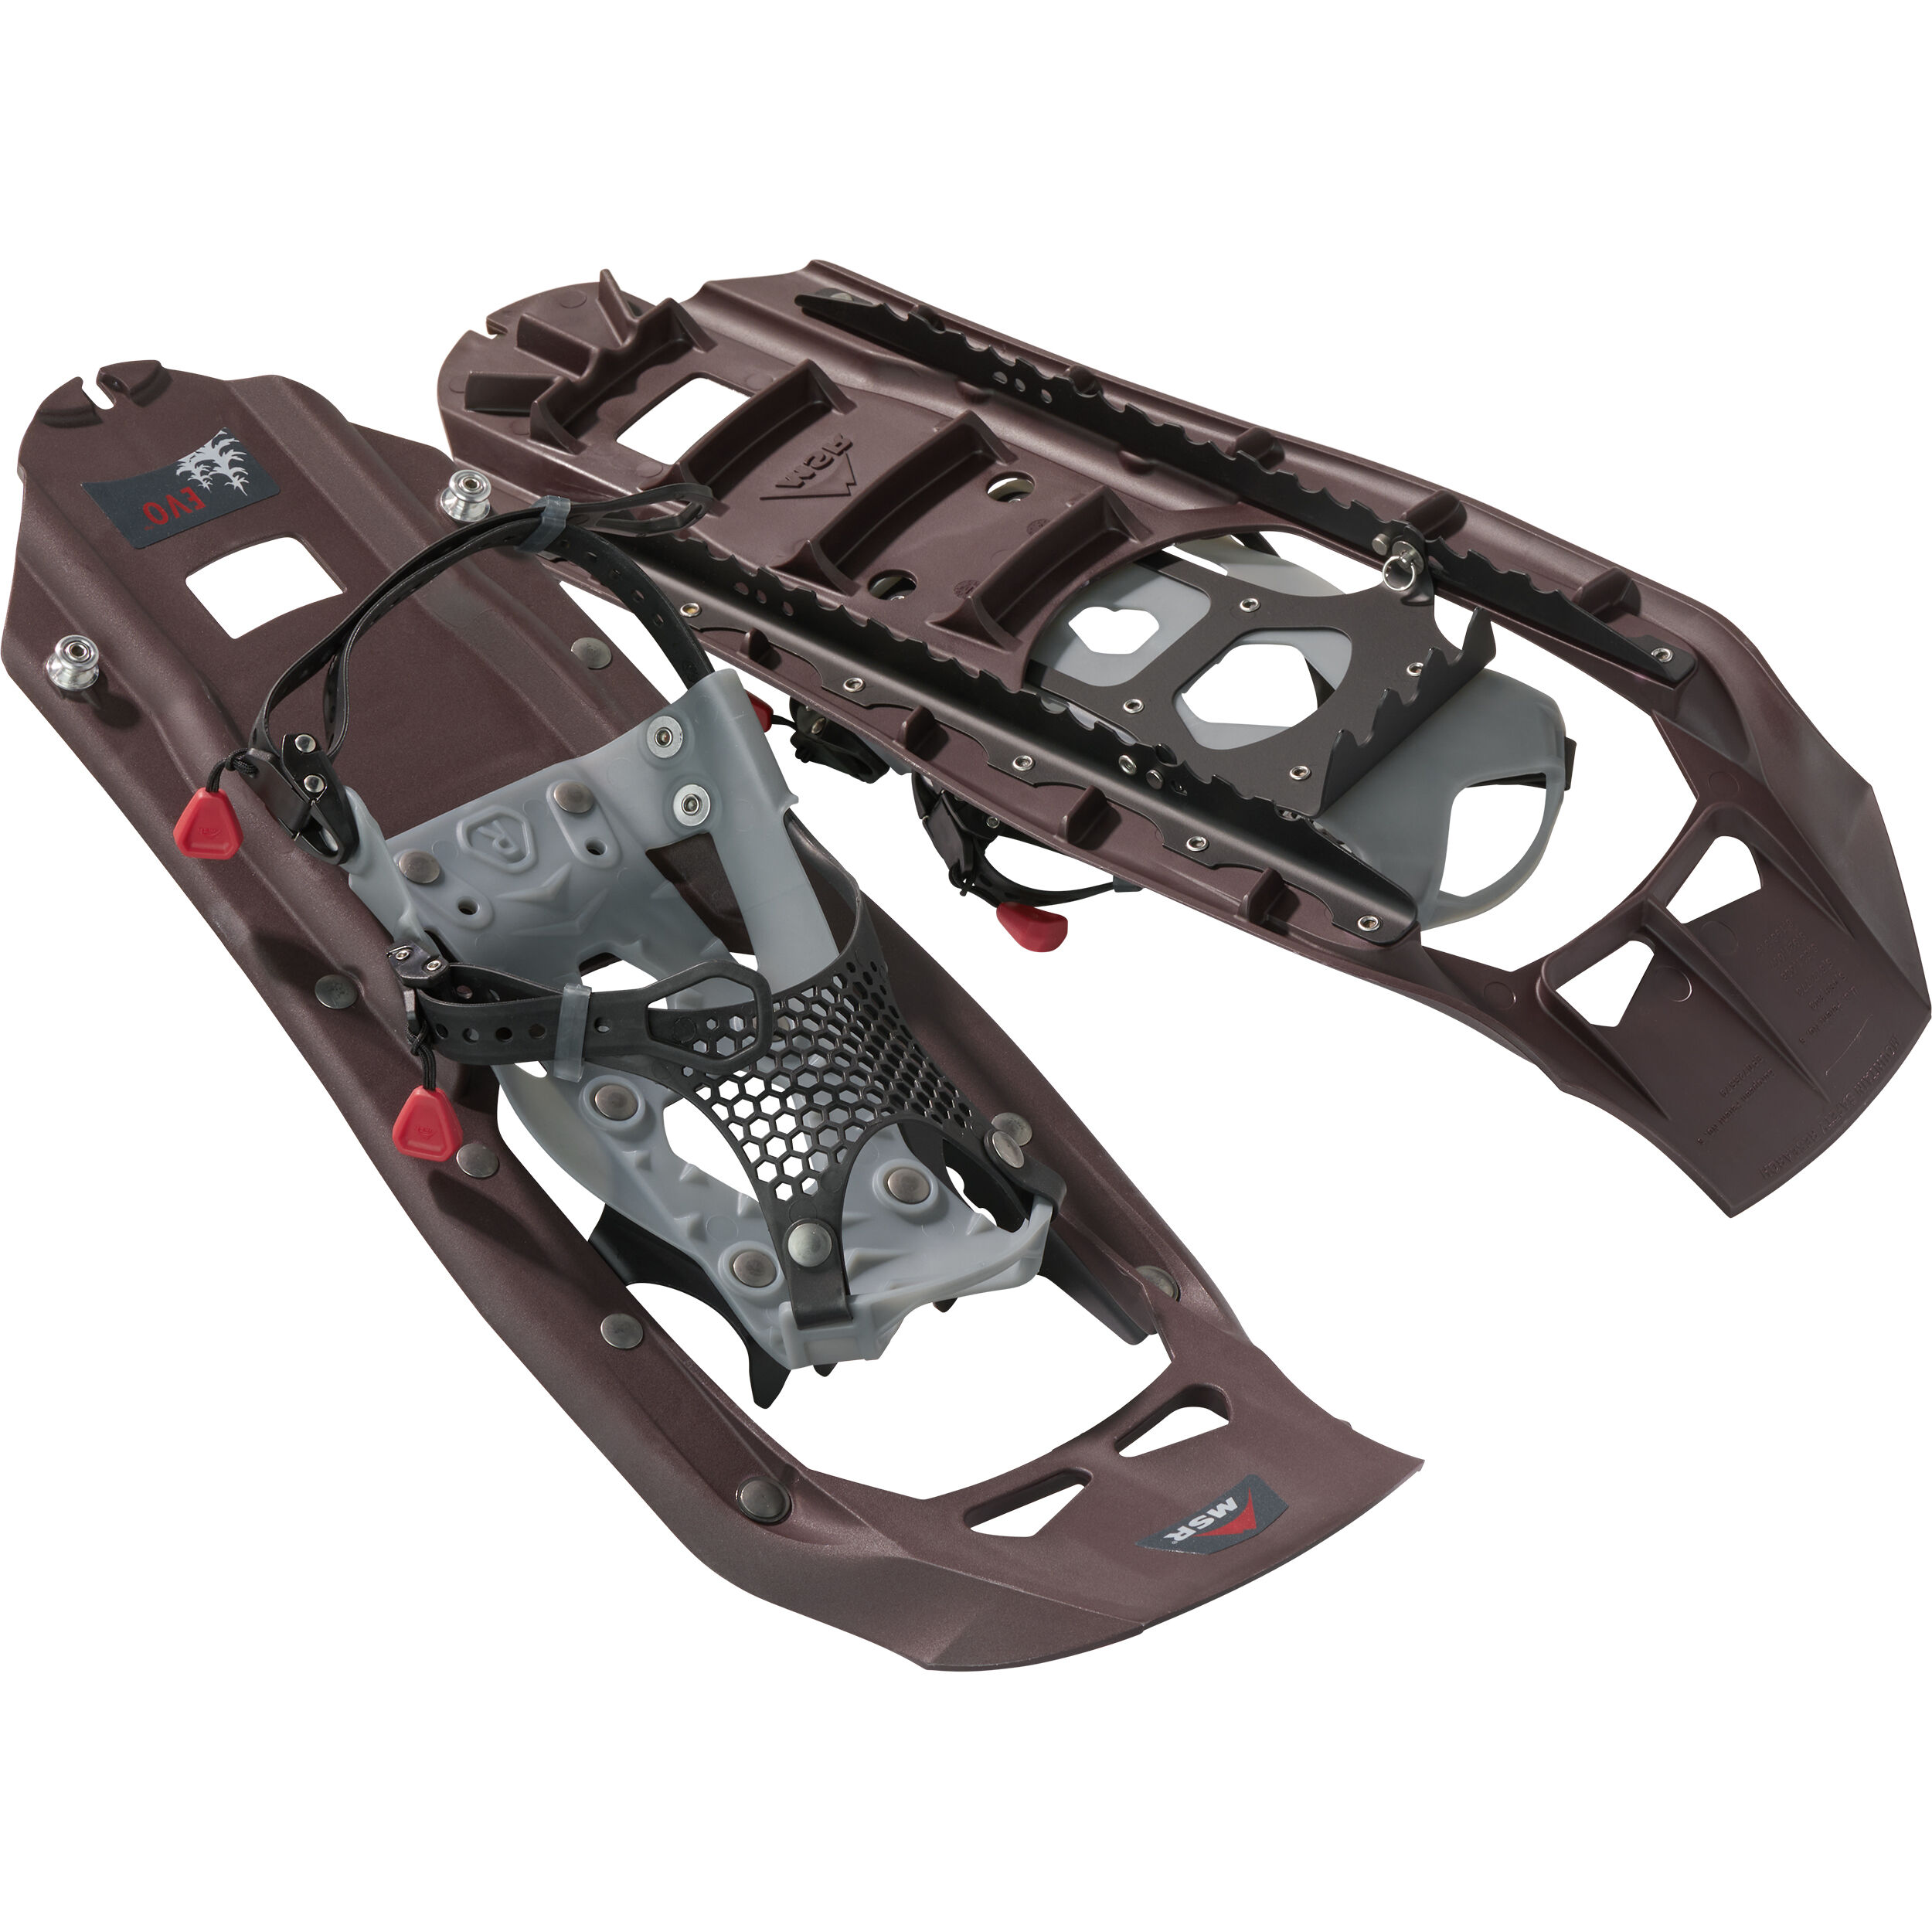 Evo™ Trail MSR Snowshoes - Day Use and Mellow Terrain | MSR®